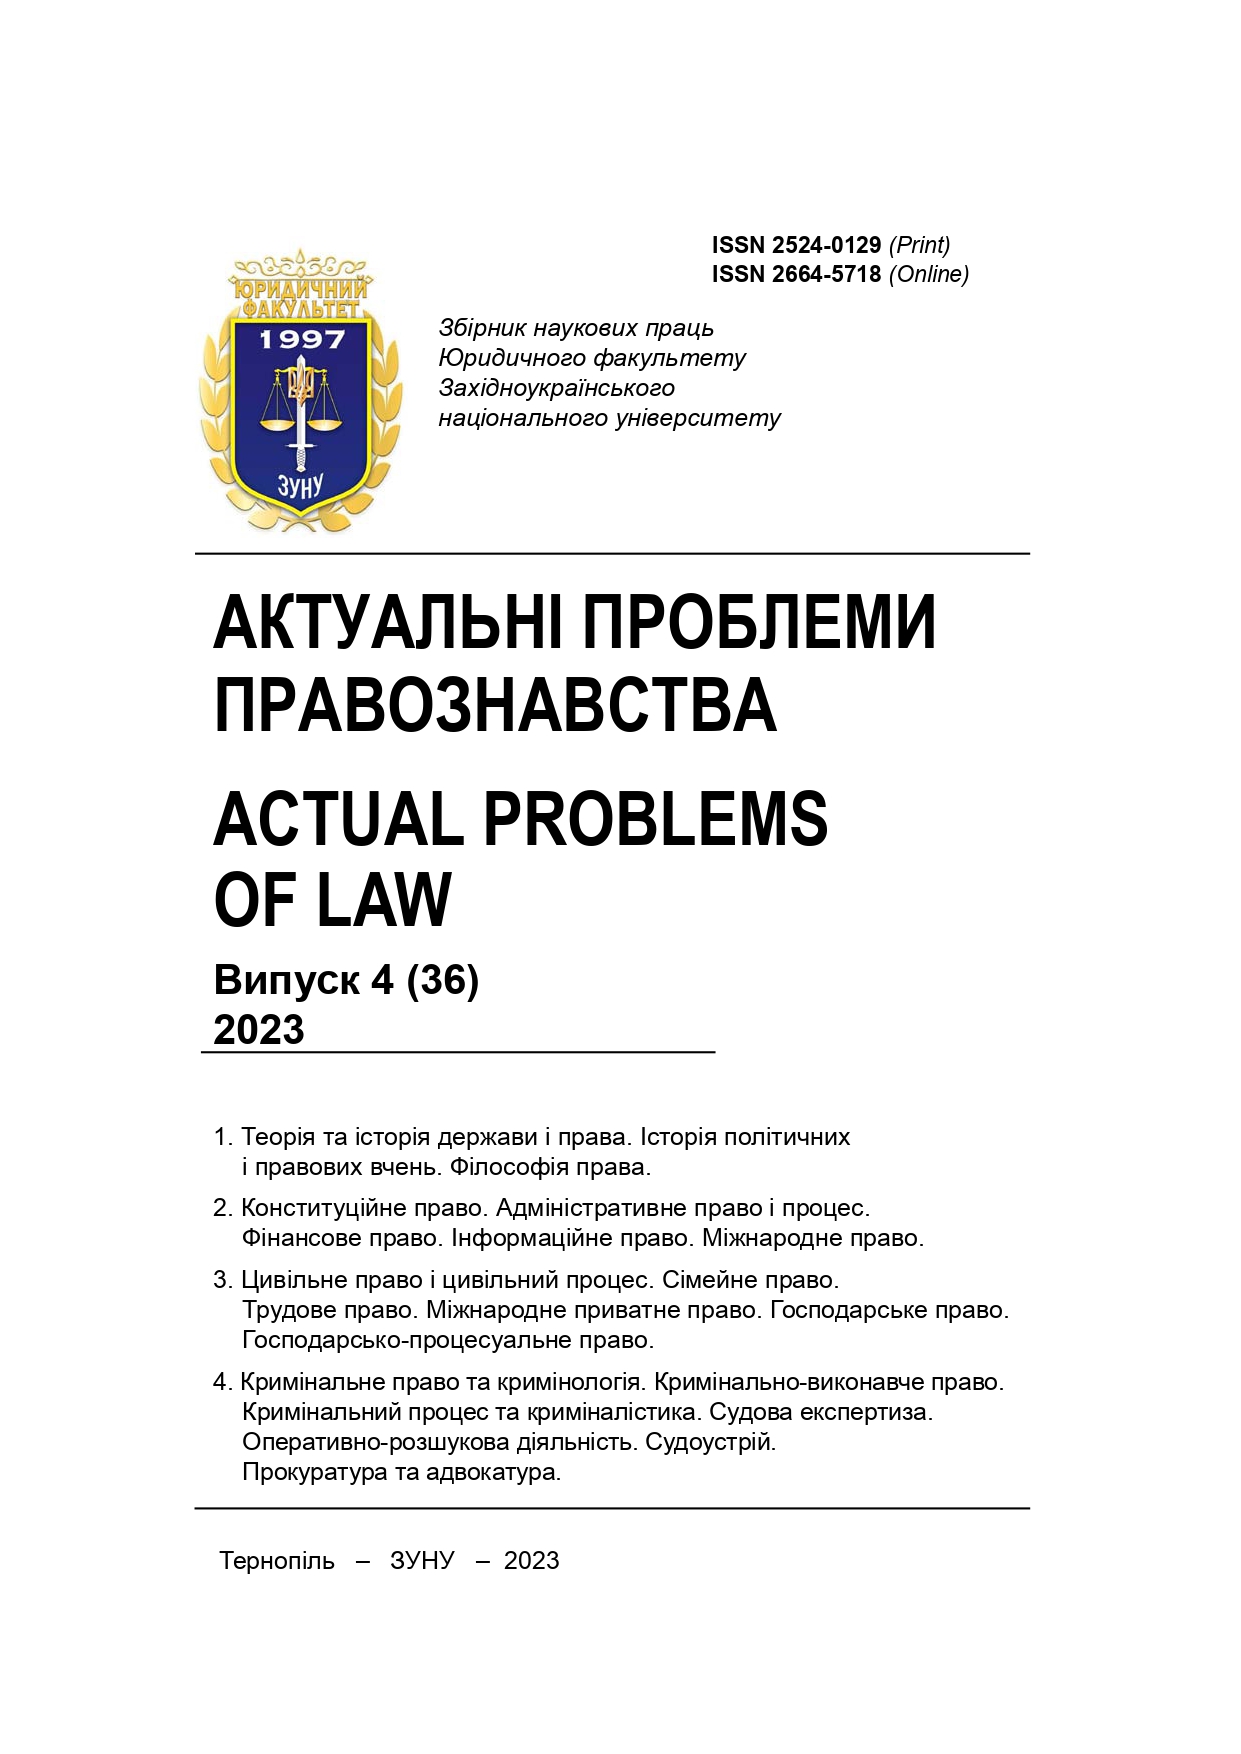 					View No. 4 (2023): ACTUAL PROBLEMS OF LAW
				